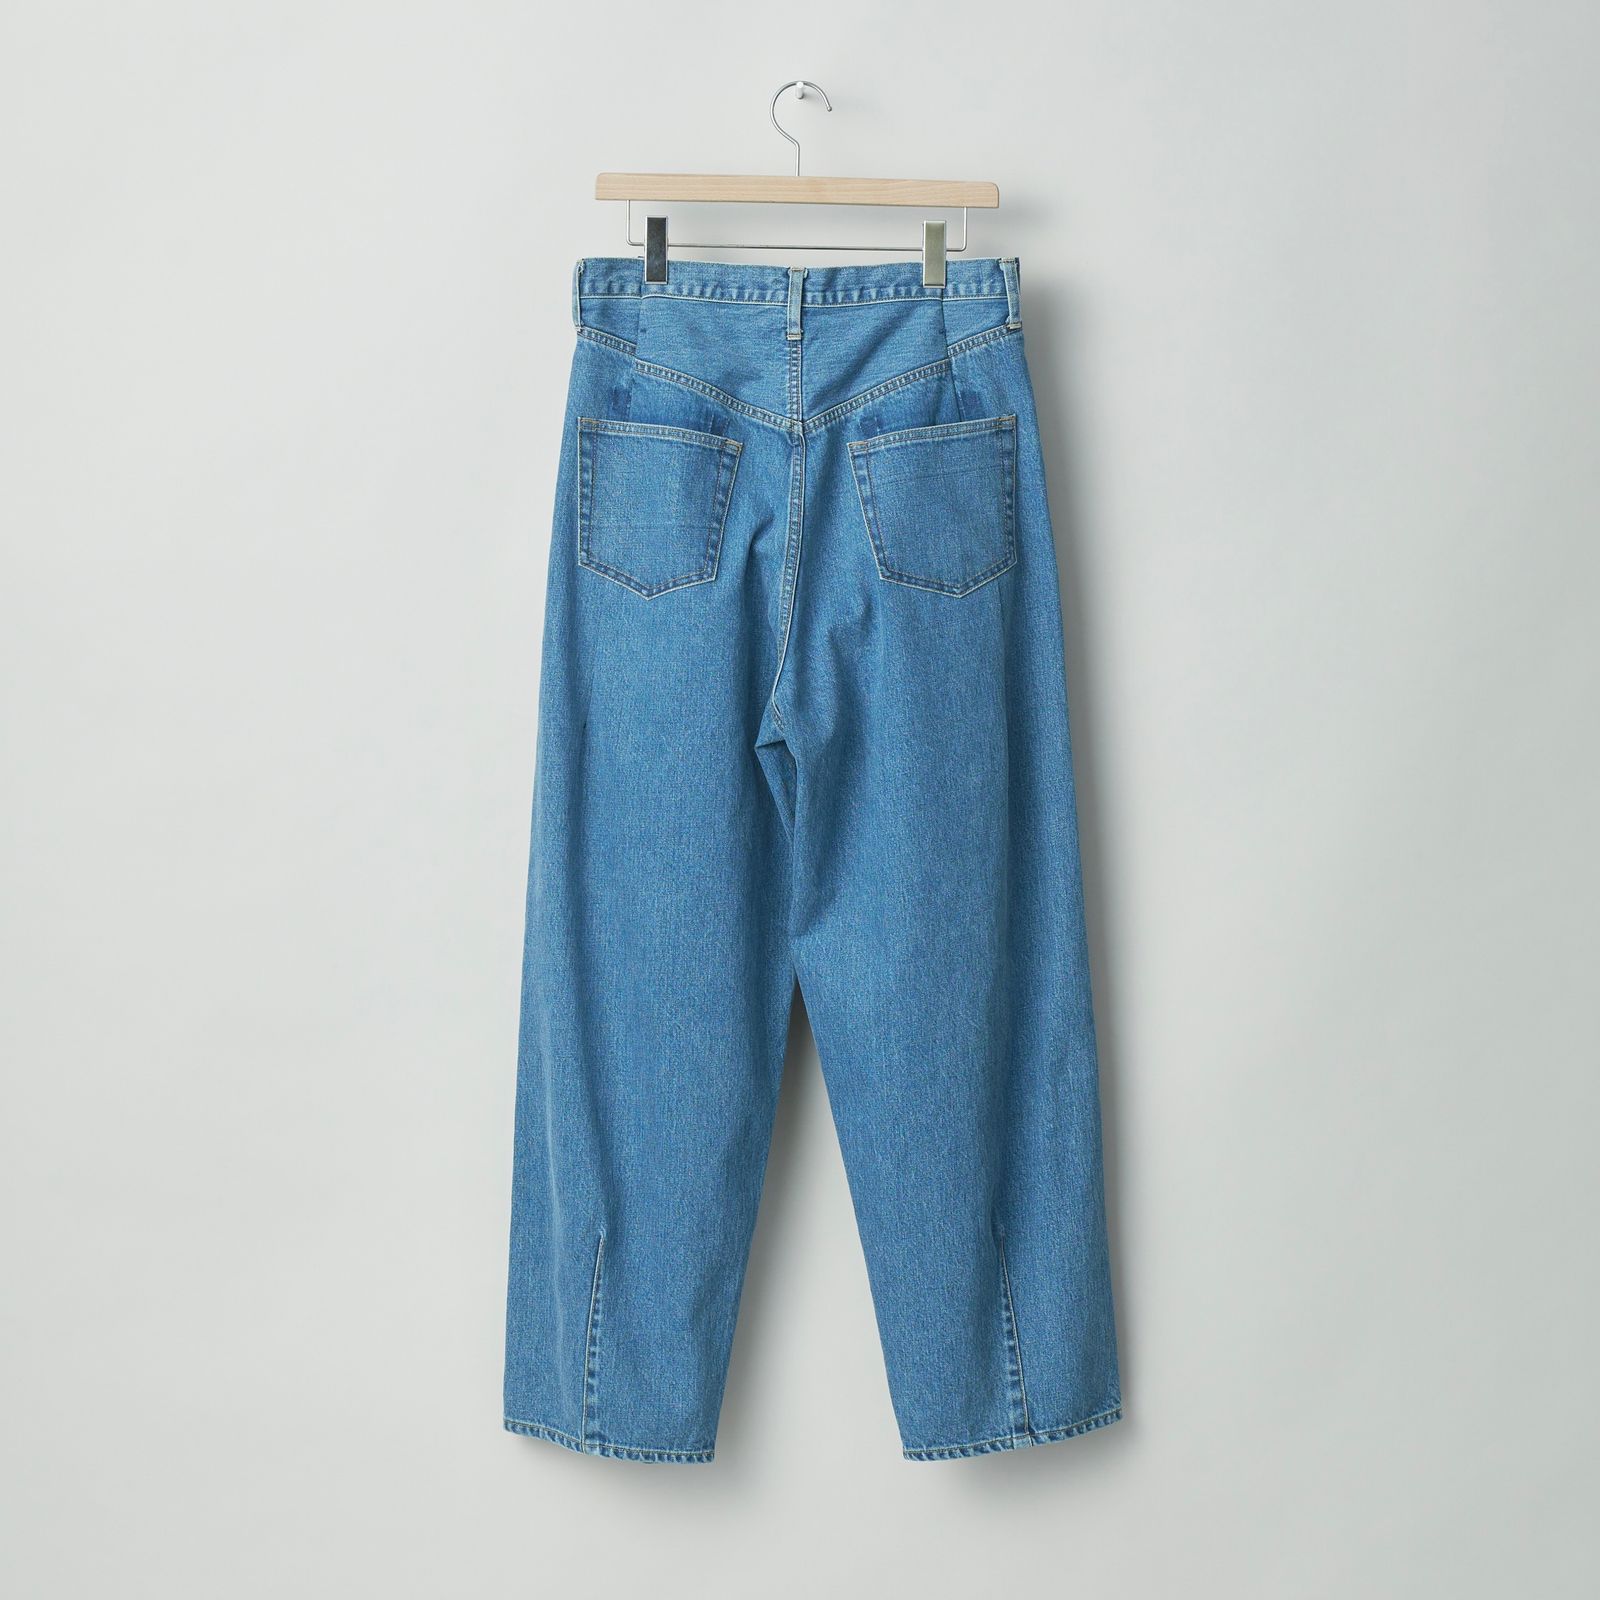 stein - 【残りわずか】Vintage Reproduction Damage Wide Denim Jeans ...